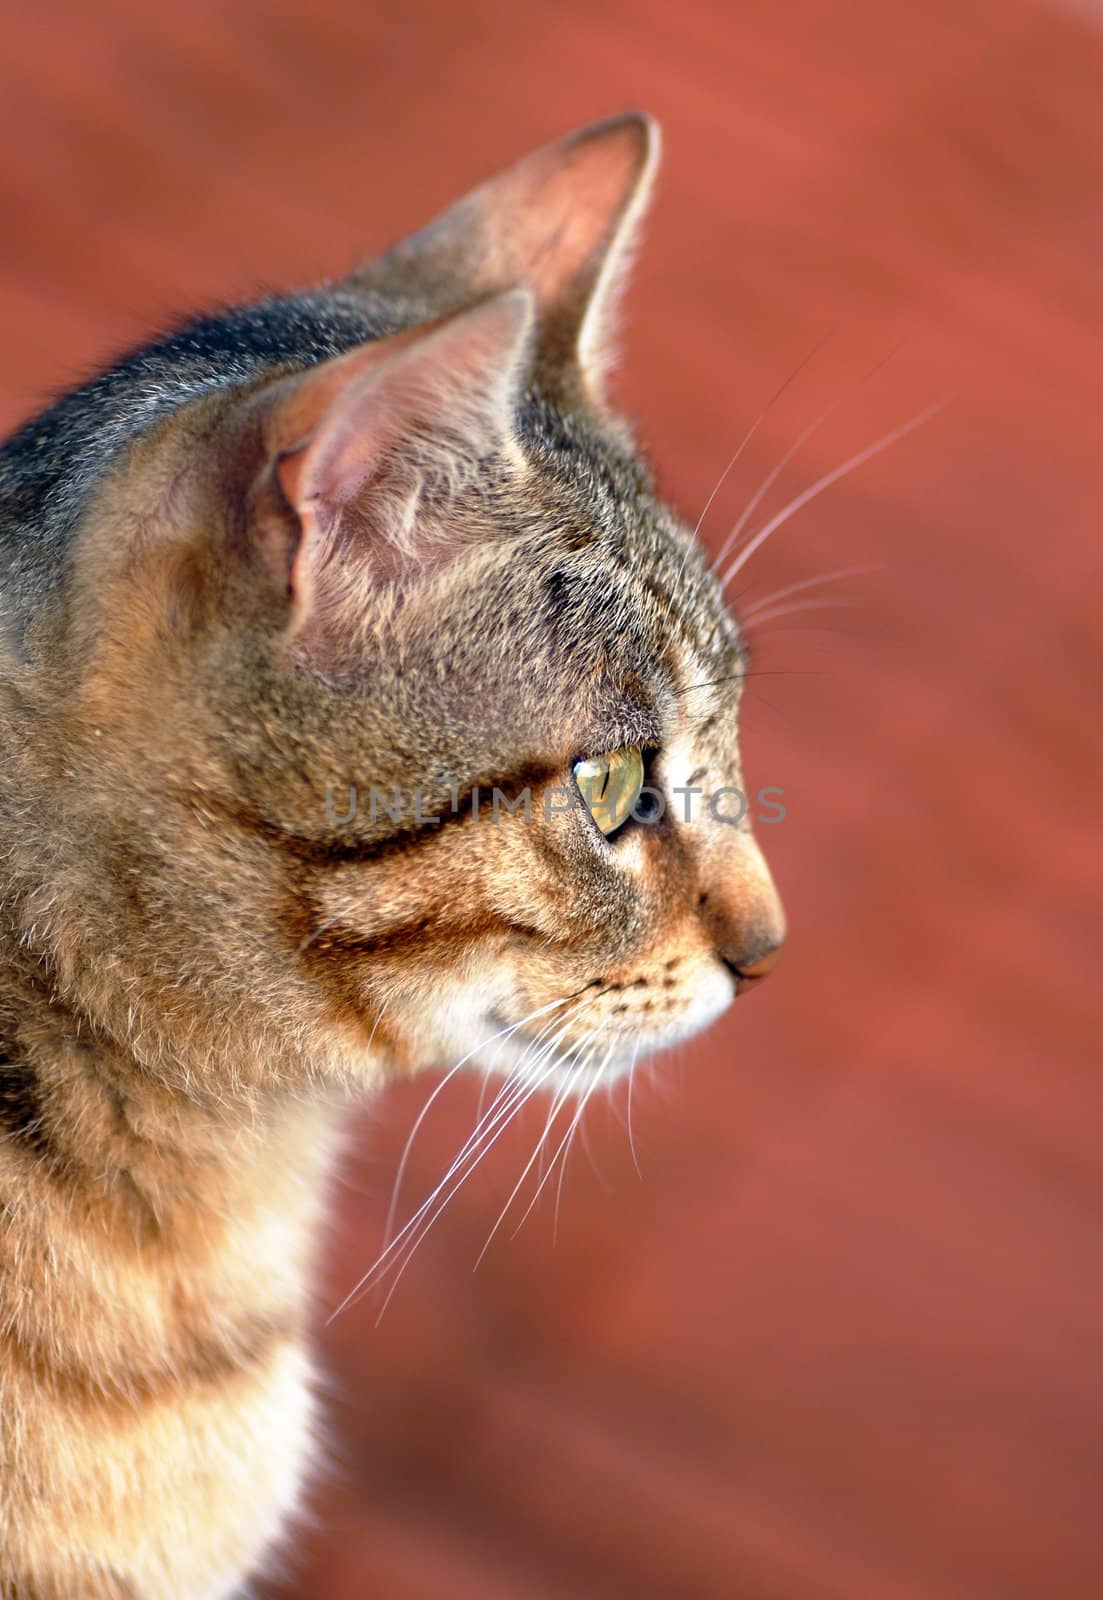 mixed-breed young cat portrait outdoors side view